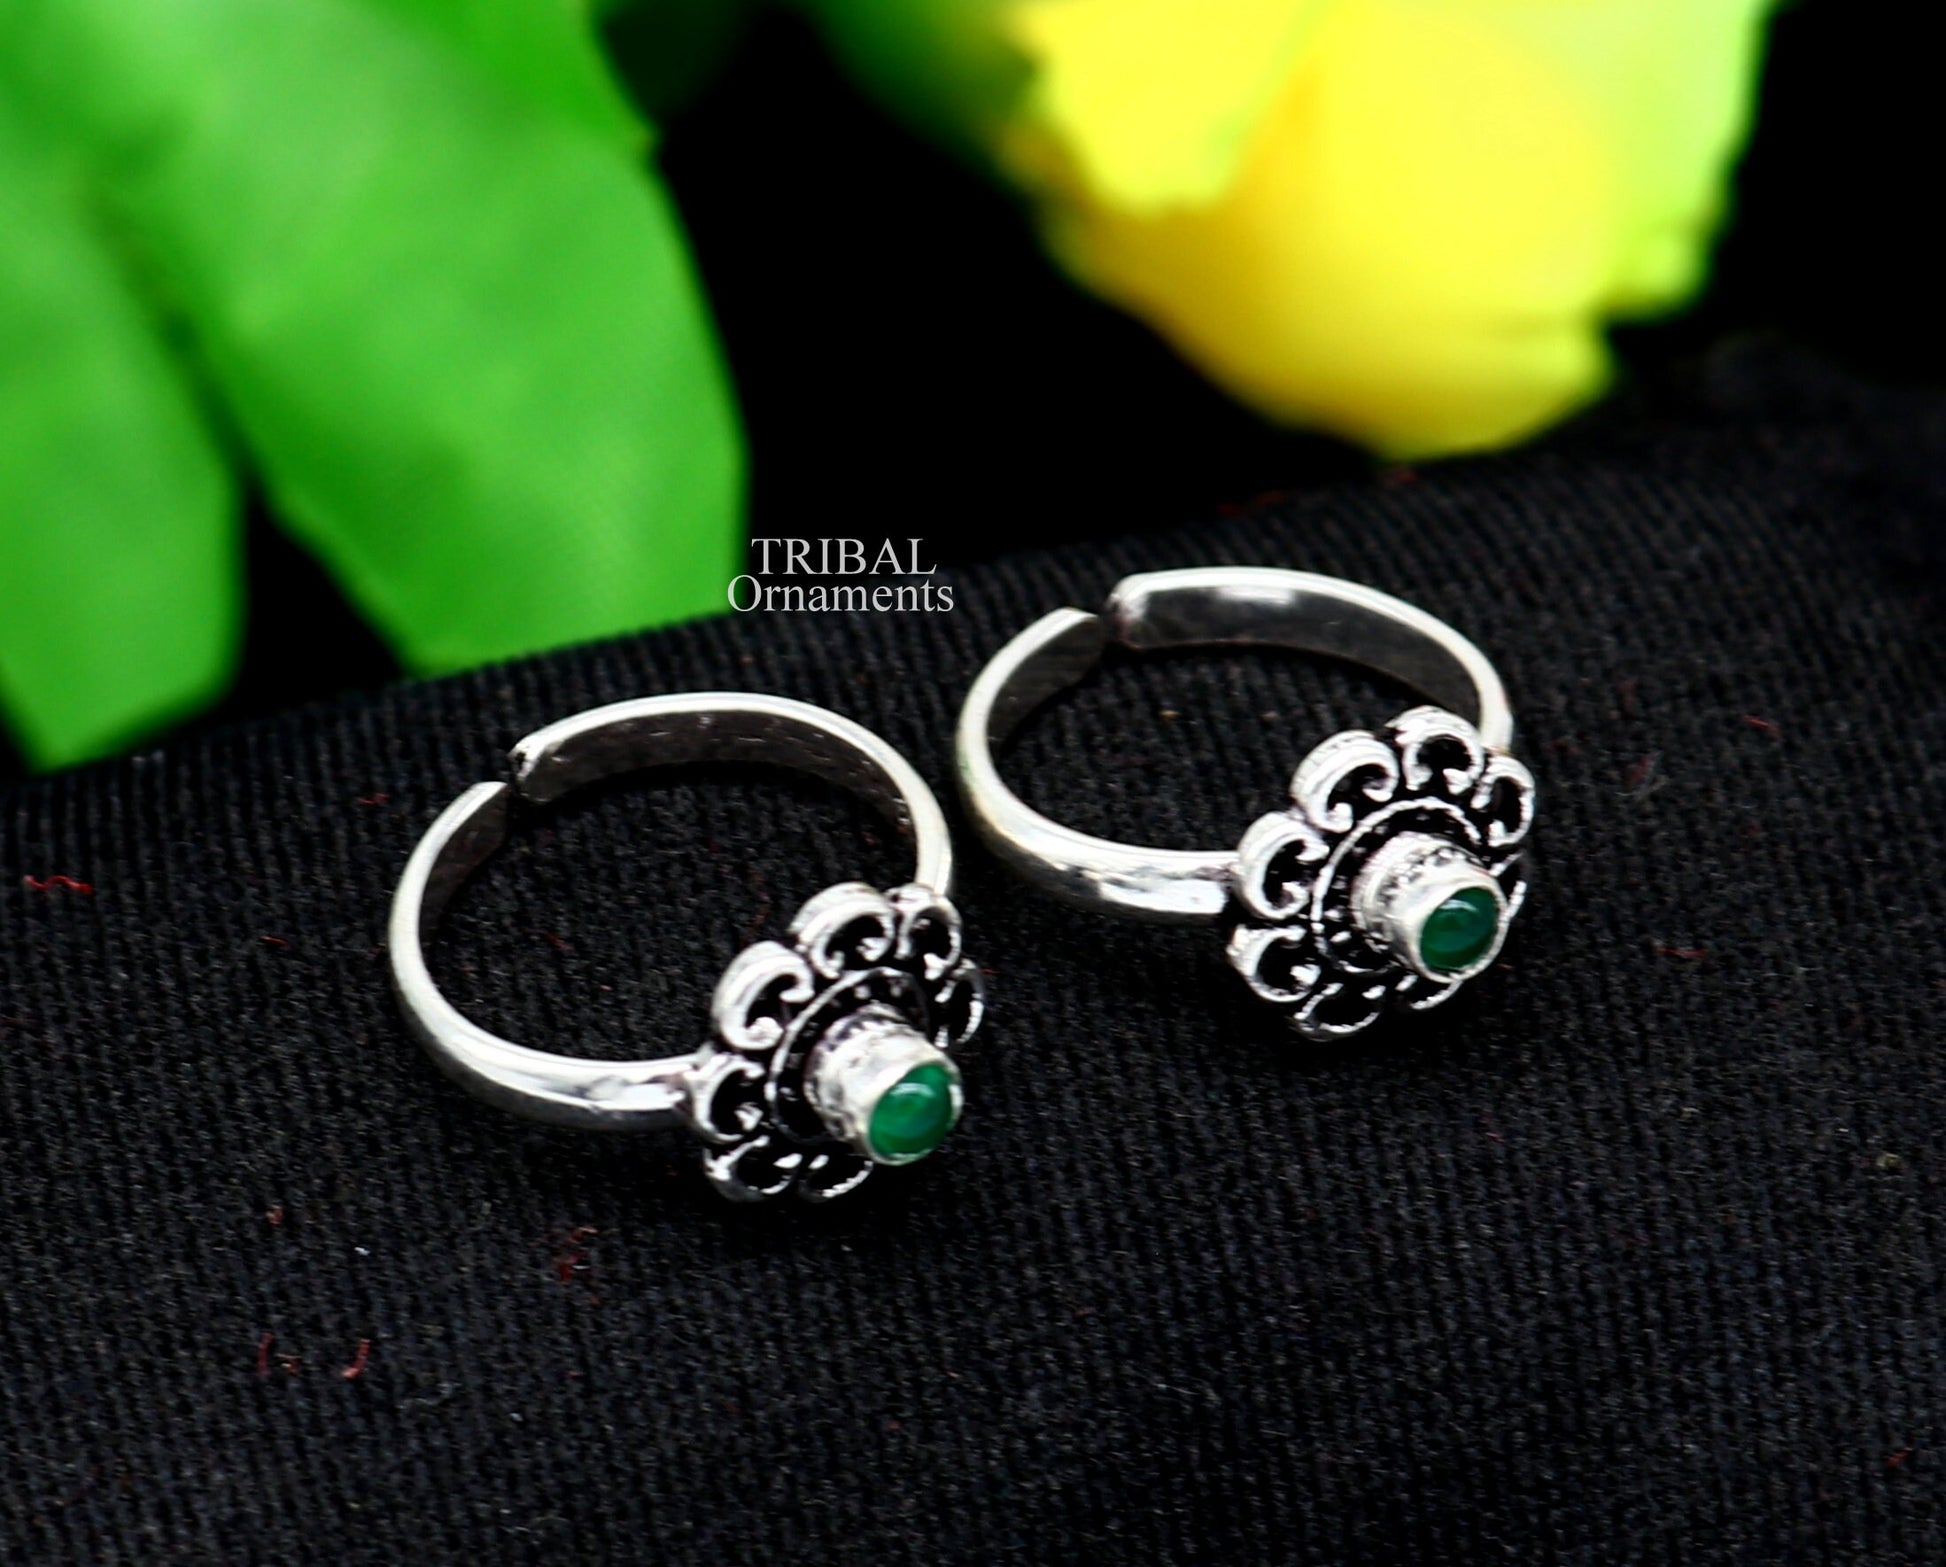 925 sterling silver handmade fabulous tiny toe ring band green stone tribal belly dance vintage style ethnic jewelry from India toer145 - TRIBAL ORNAMENTS